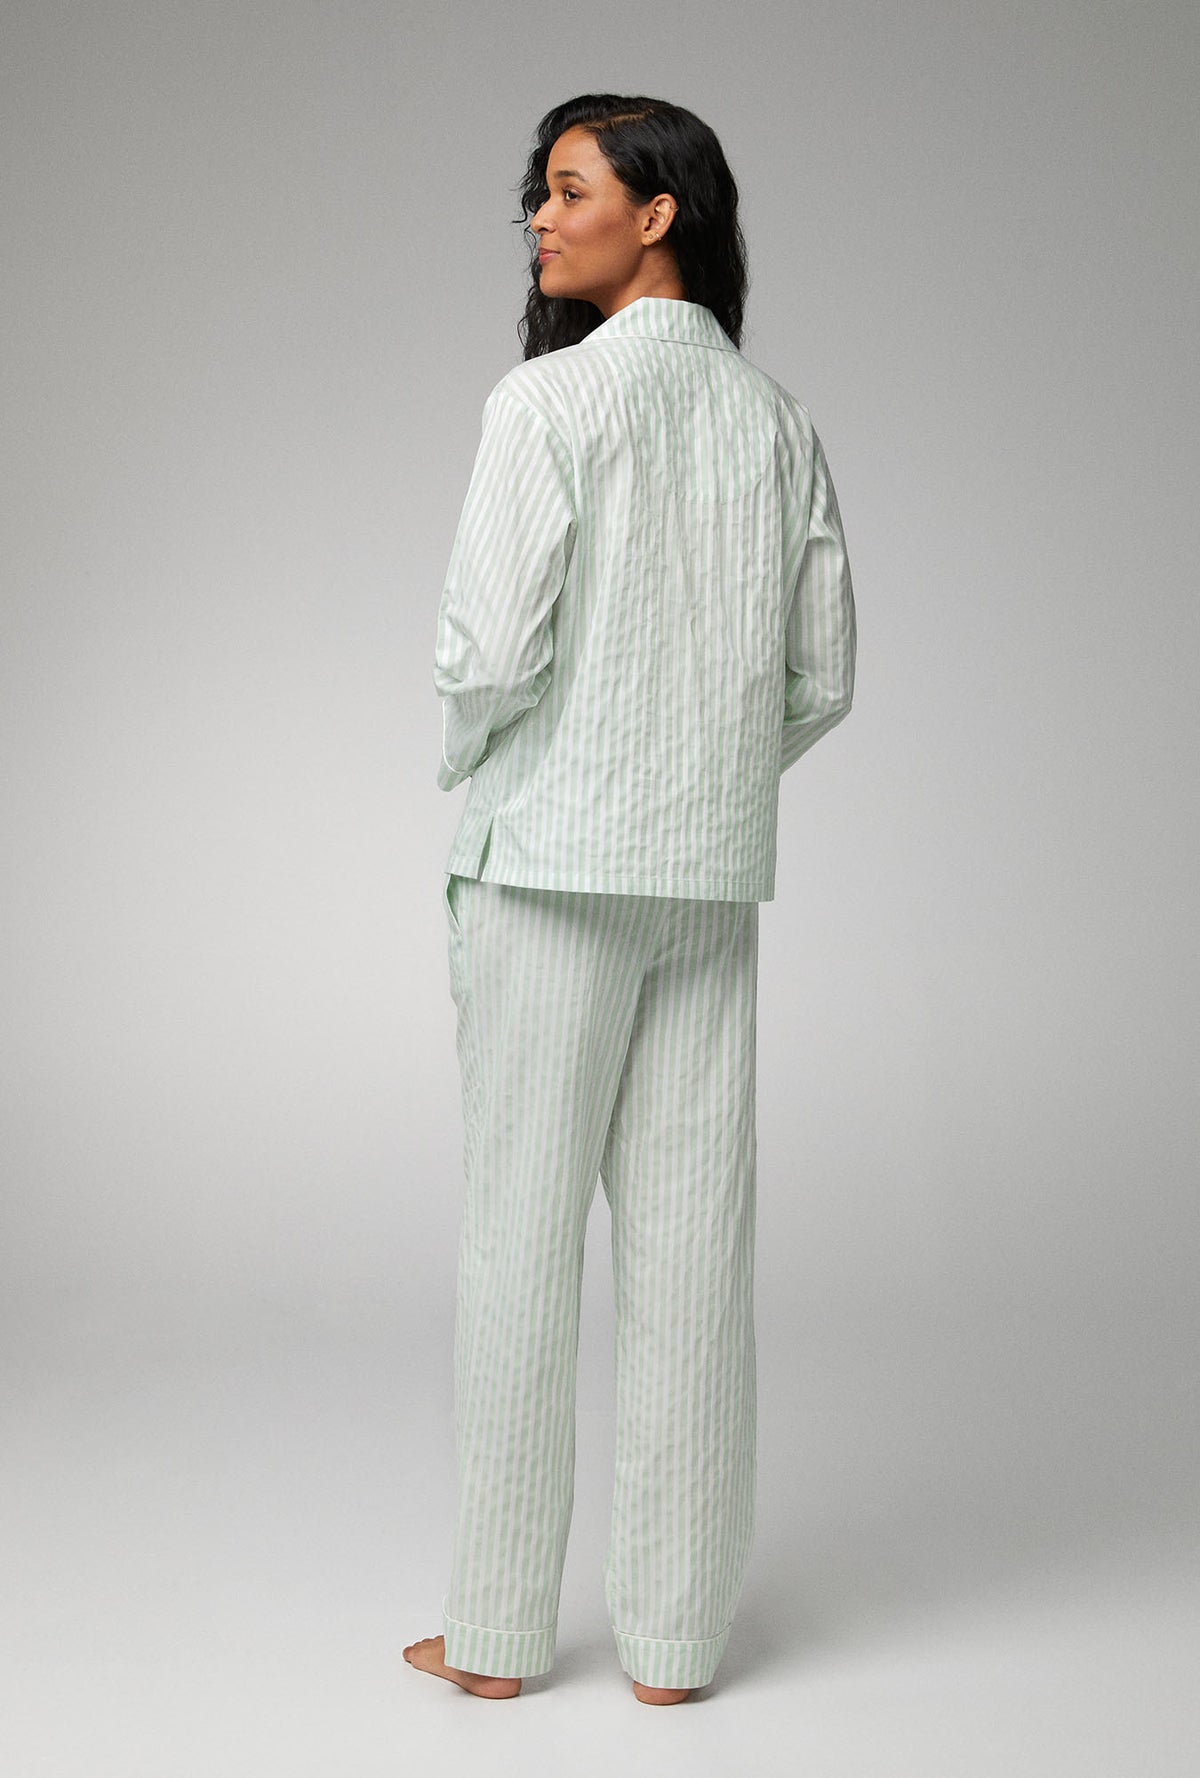 A lady wearing green Long Sleeve Classic Woven Cotton Sateen PJ Set with Mint 3D Stripe print